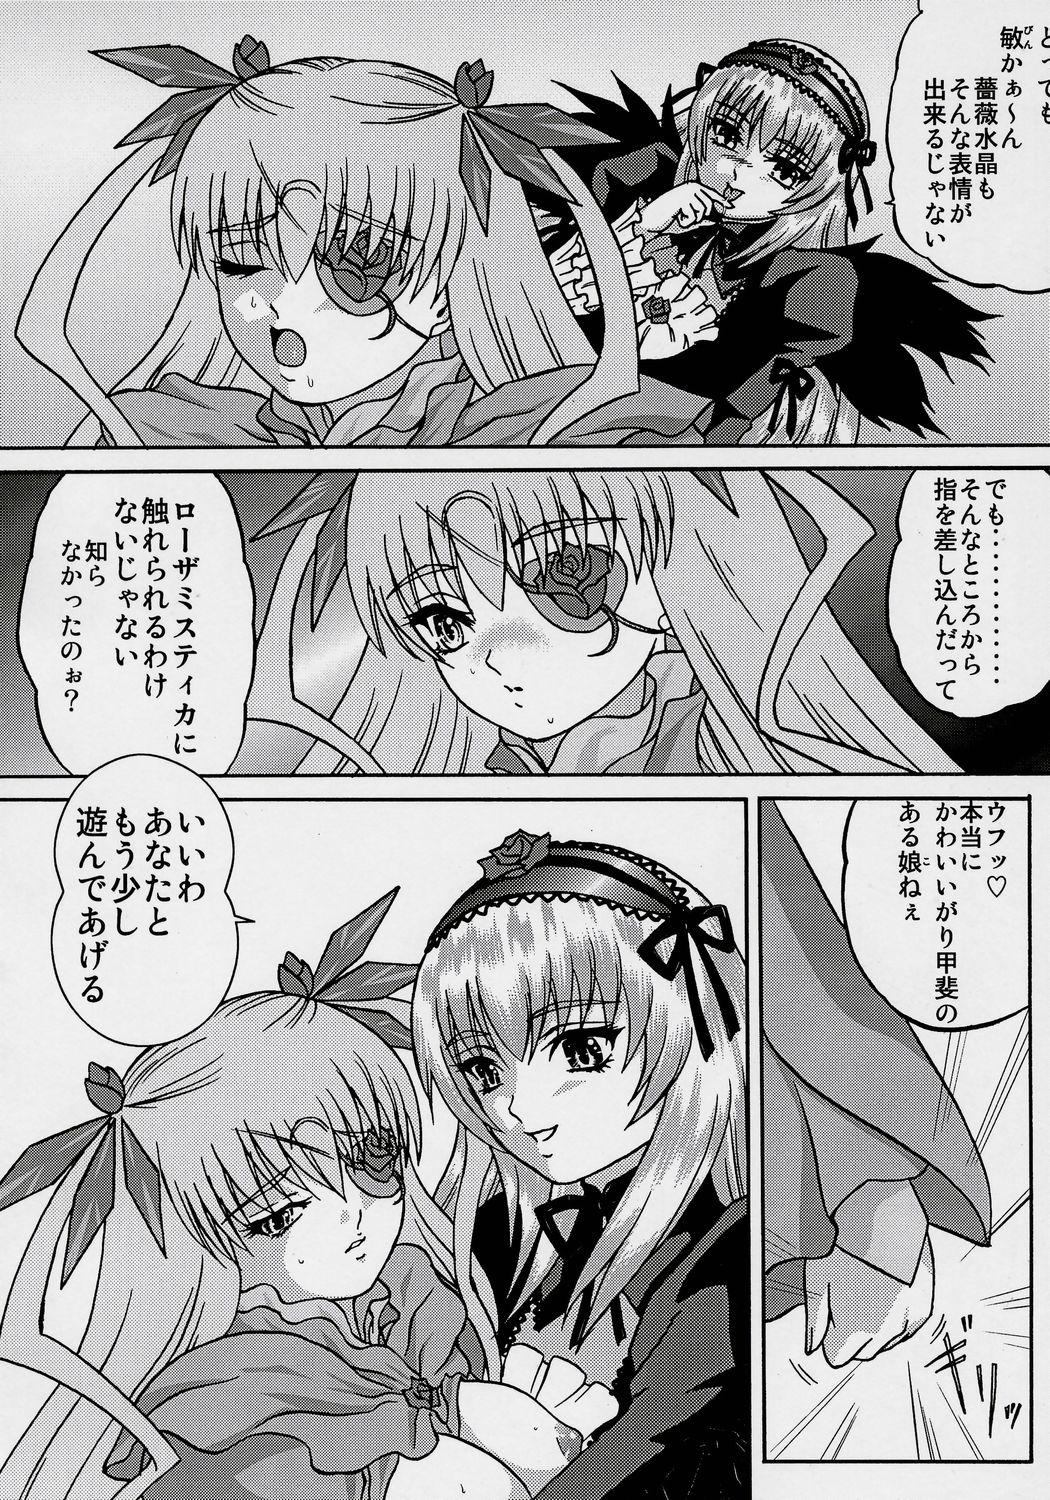 Dirty ANATOMIA ALICE II Antiheldin - Rozen maiden Oldvsyoung - Page 11